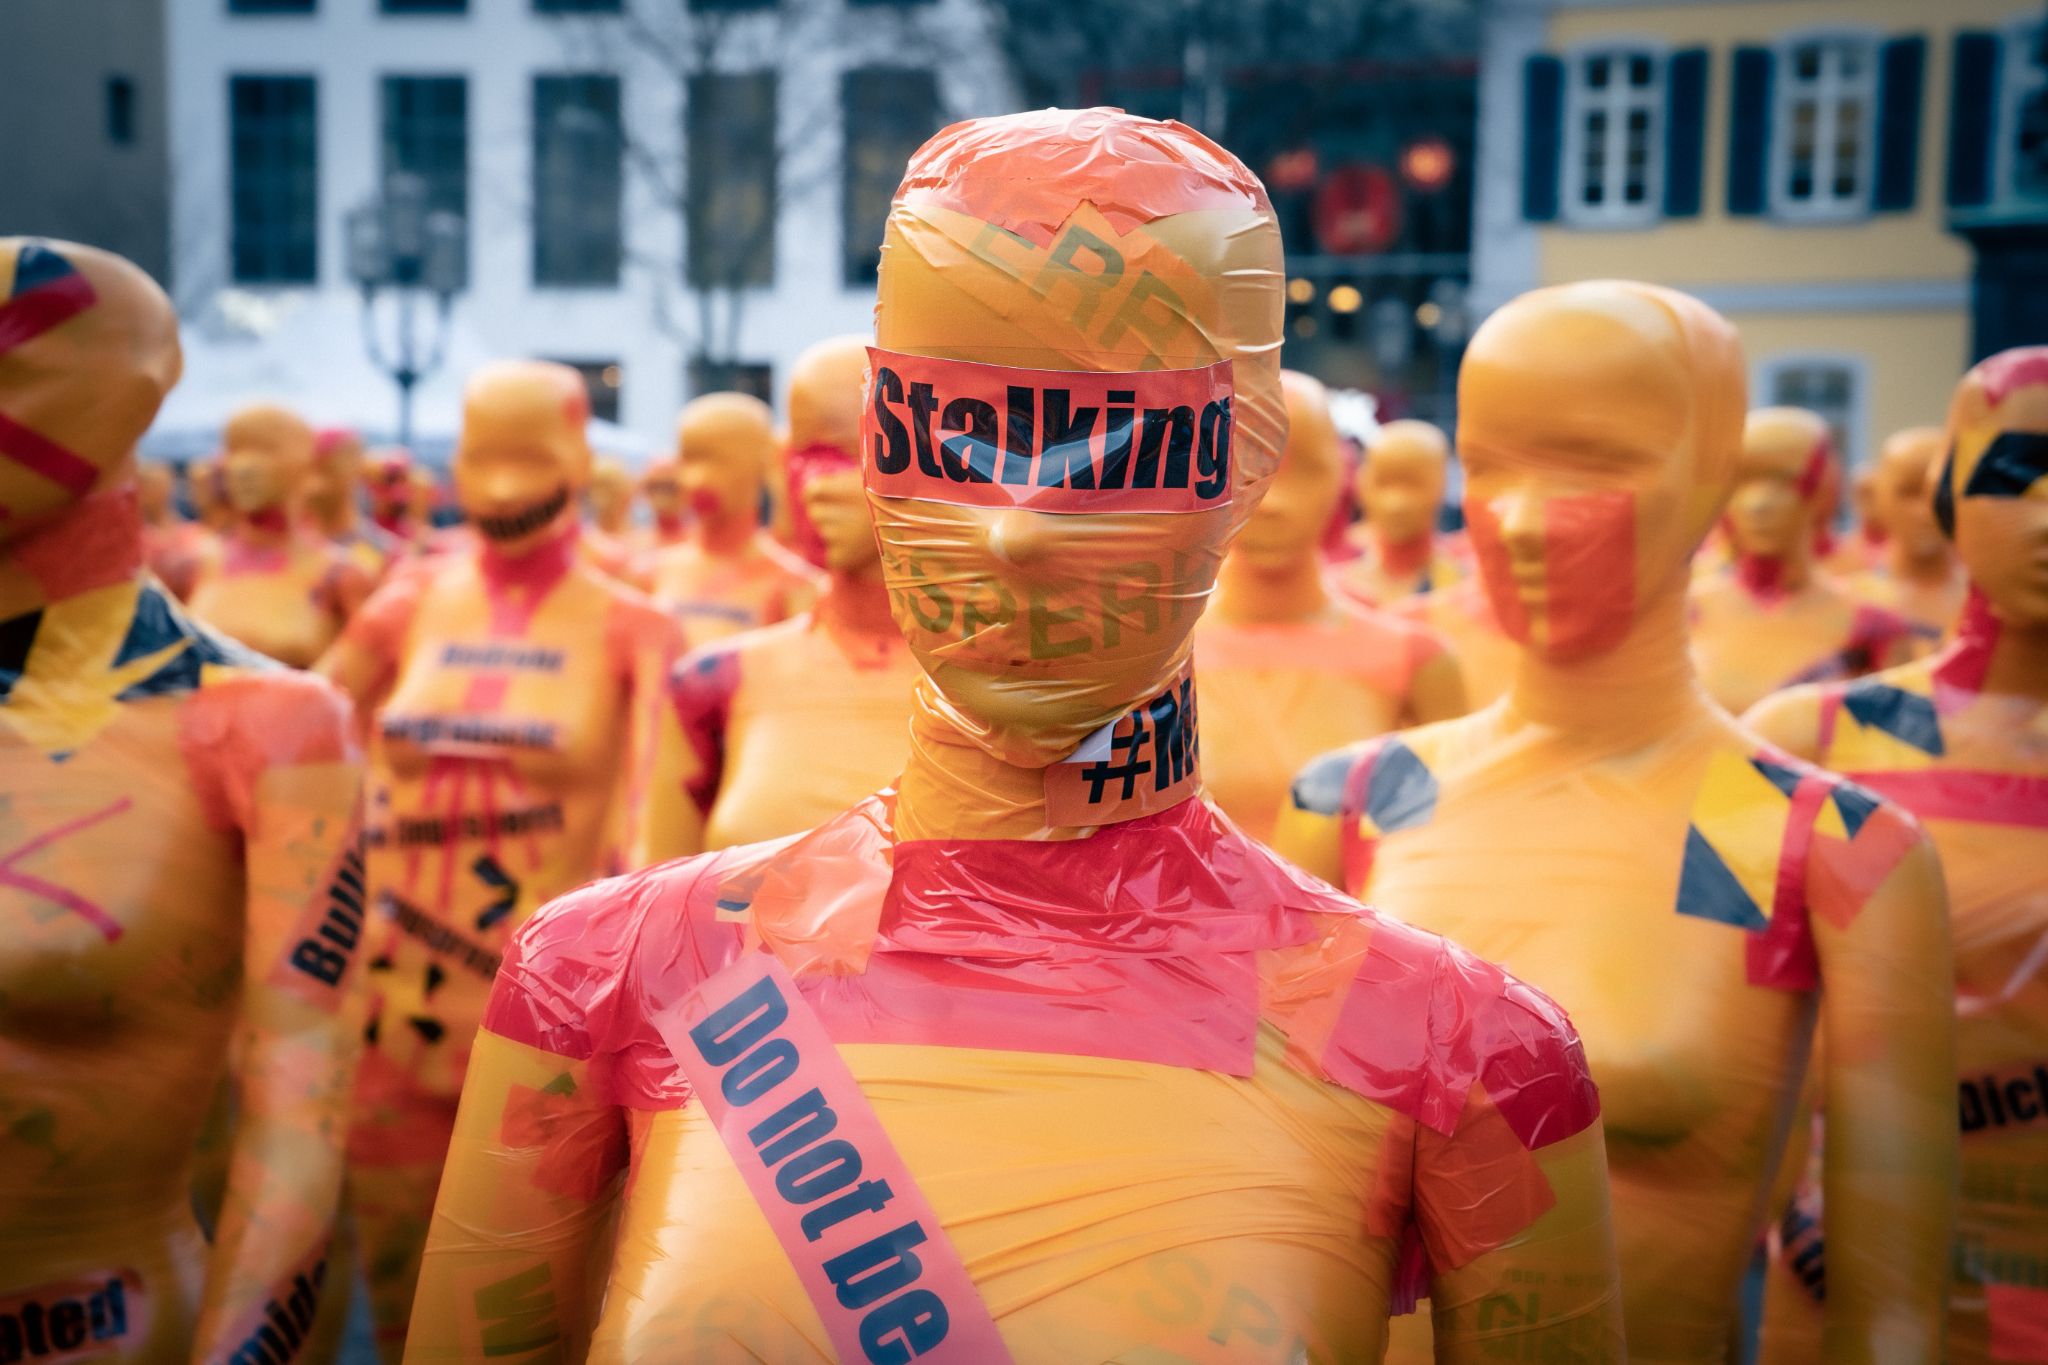 A group of dummy mannequins wrapped in cautionary tape